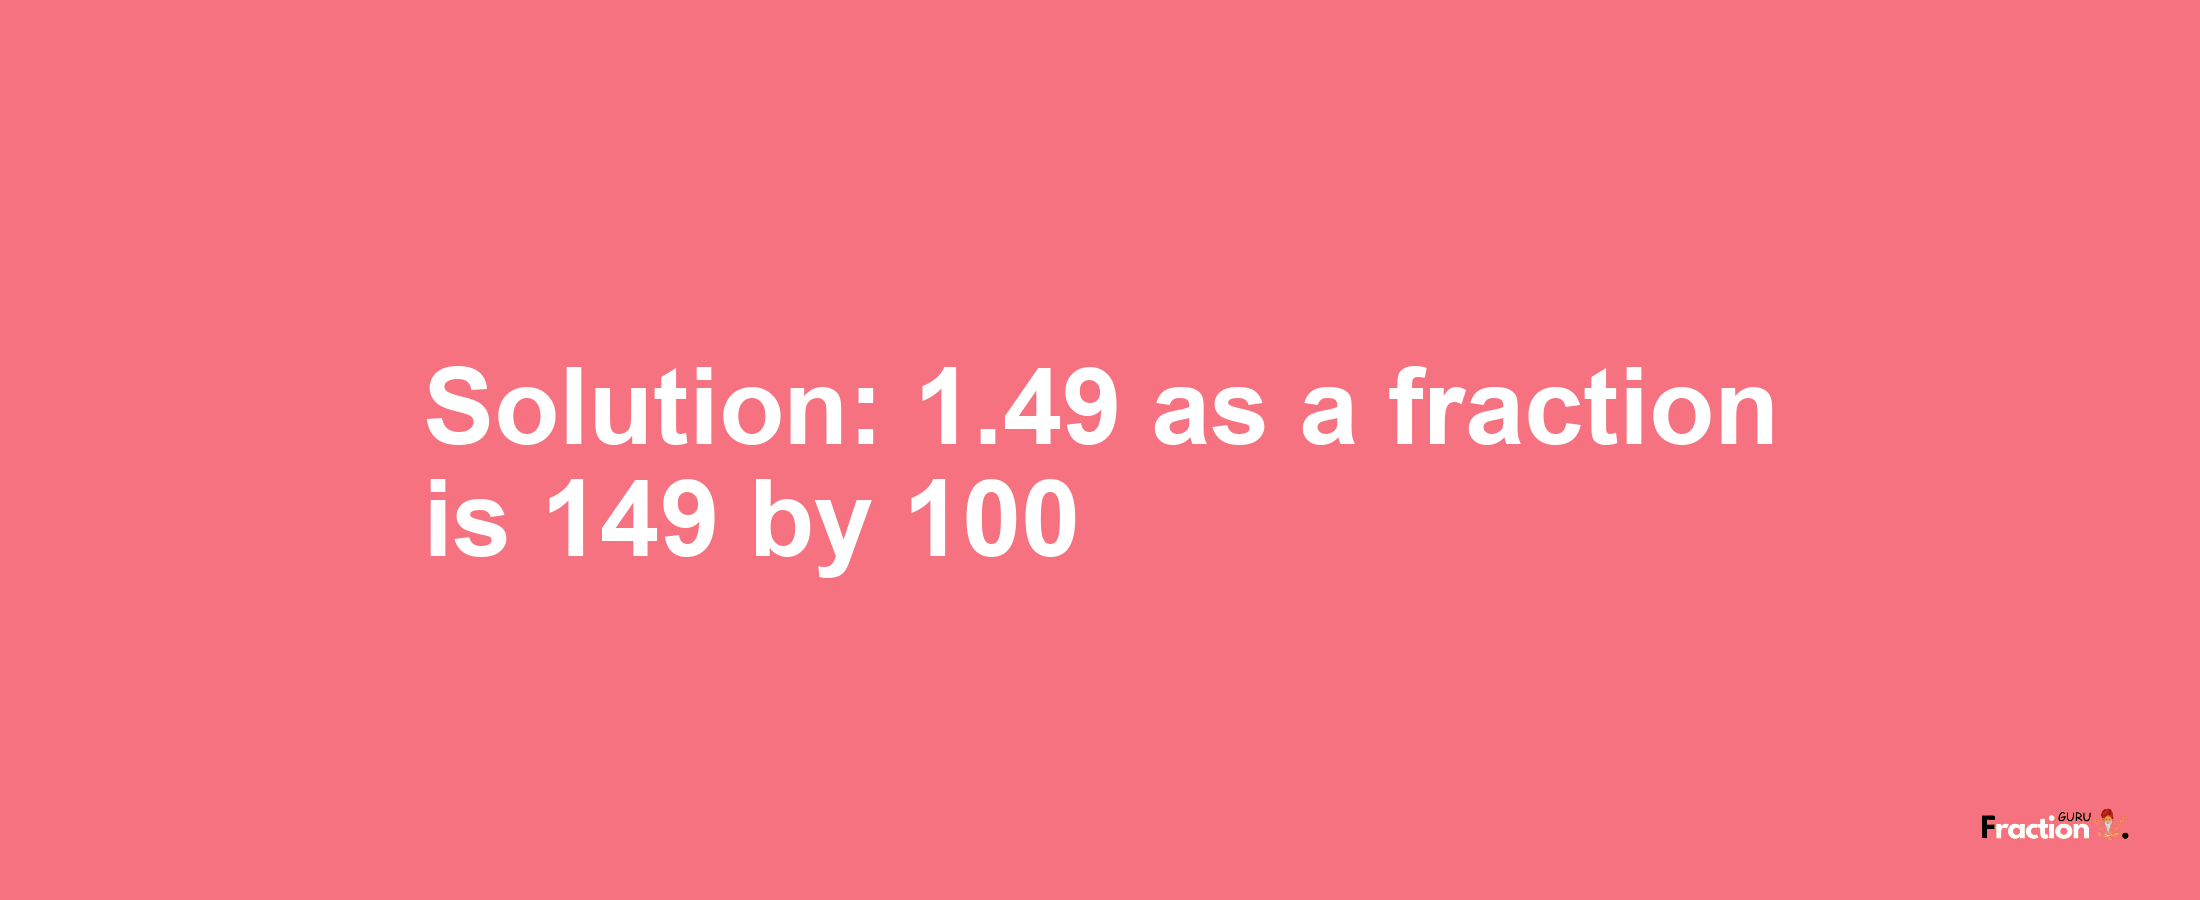 Solution:1.49 as a fraction is 149/100